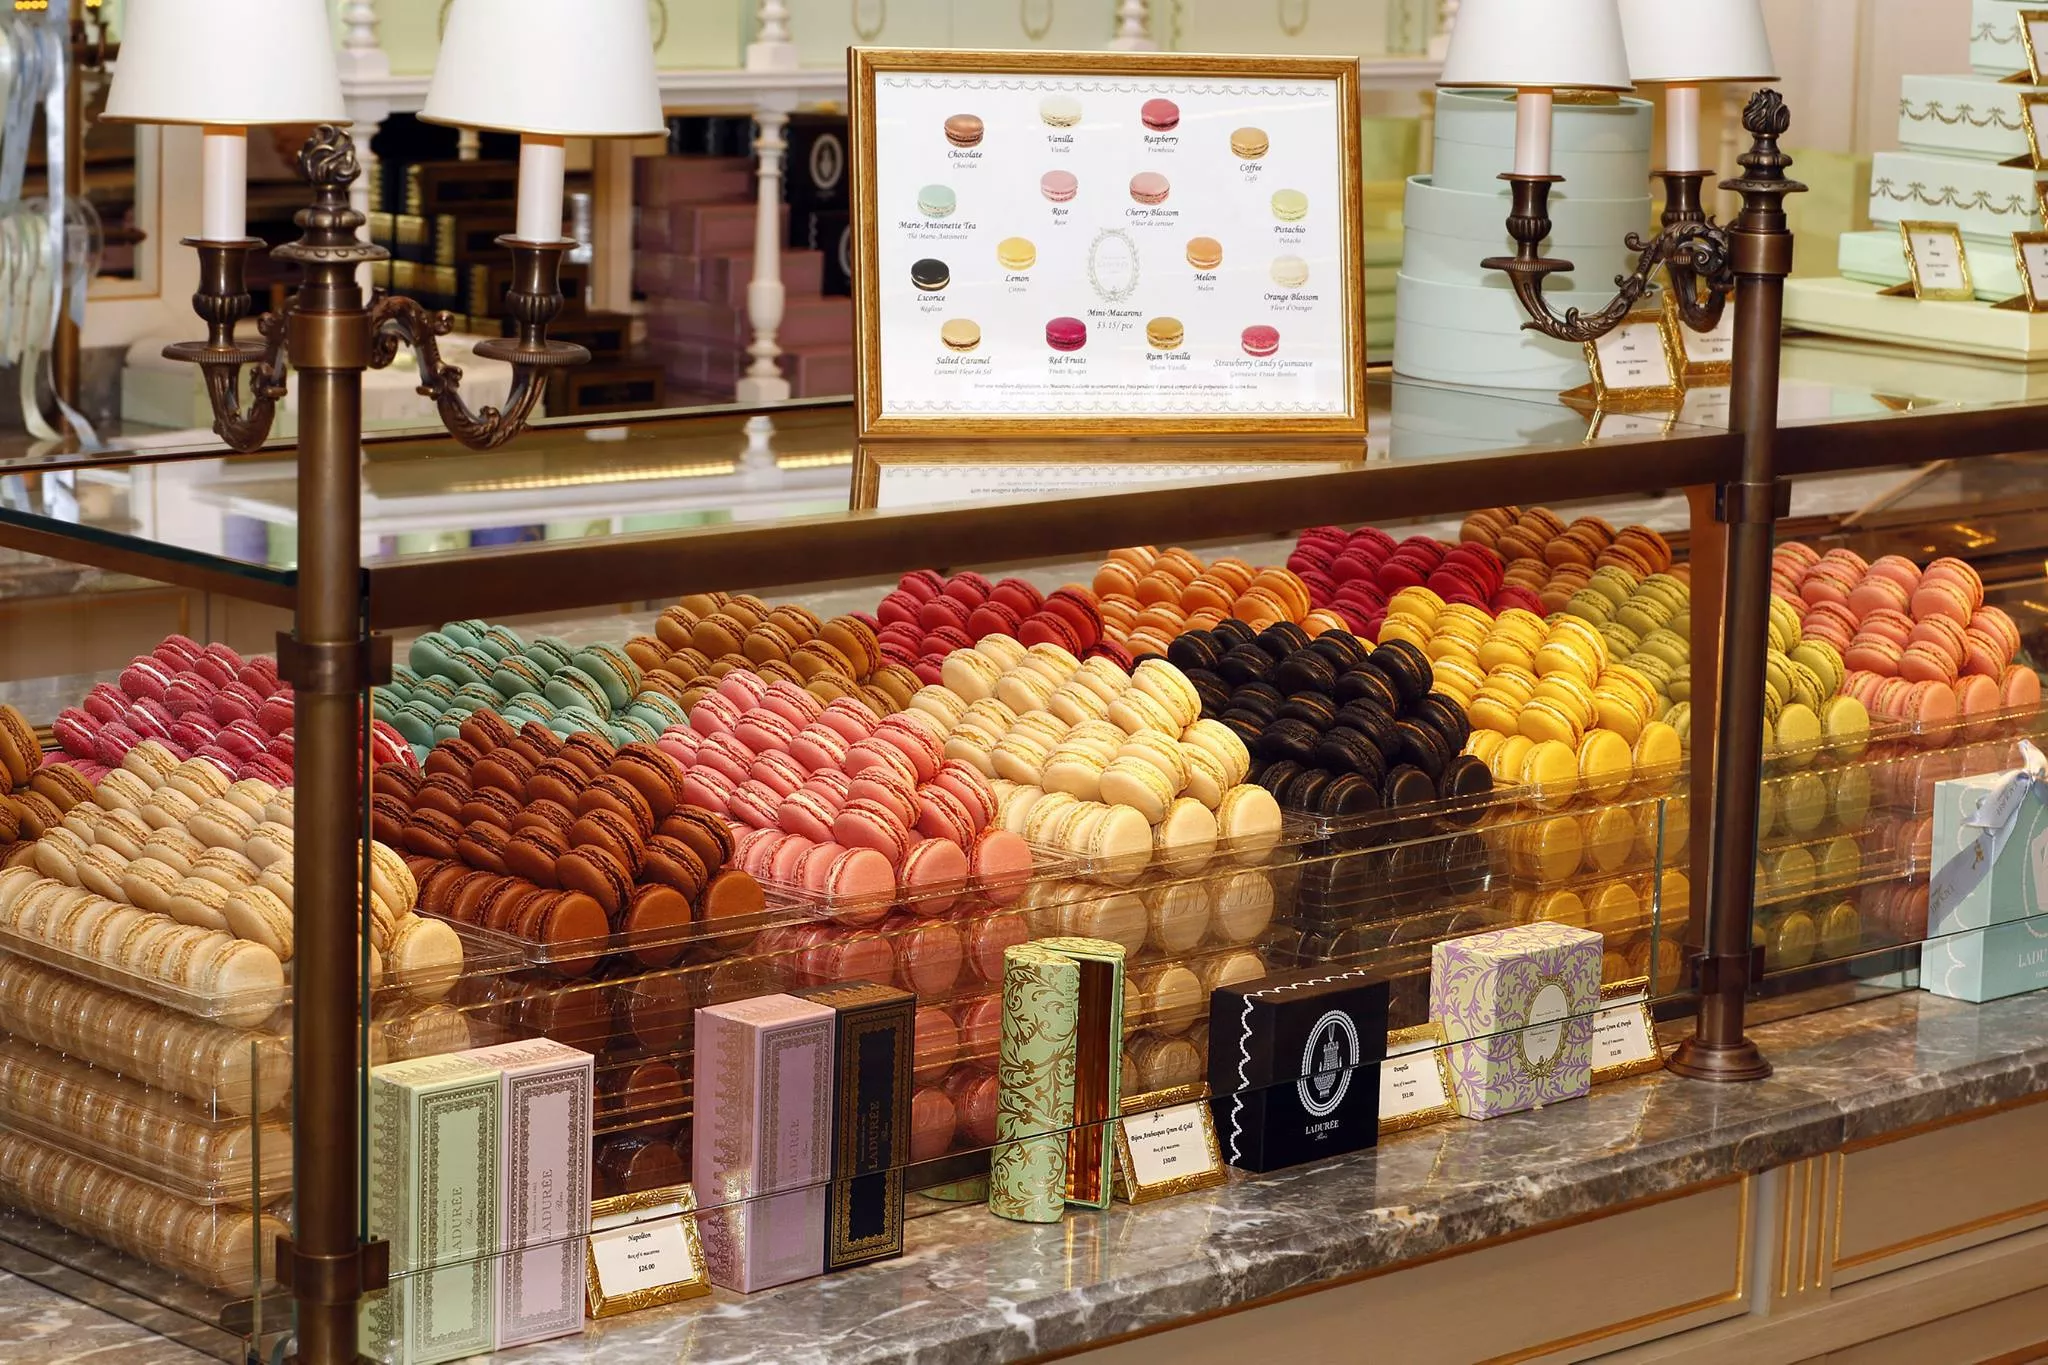 Laduree in France, Europe | Confectionery & Bakeries - Rated 9.4